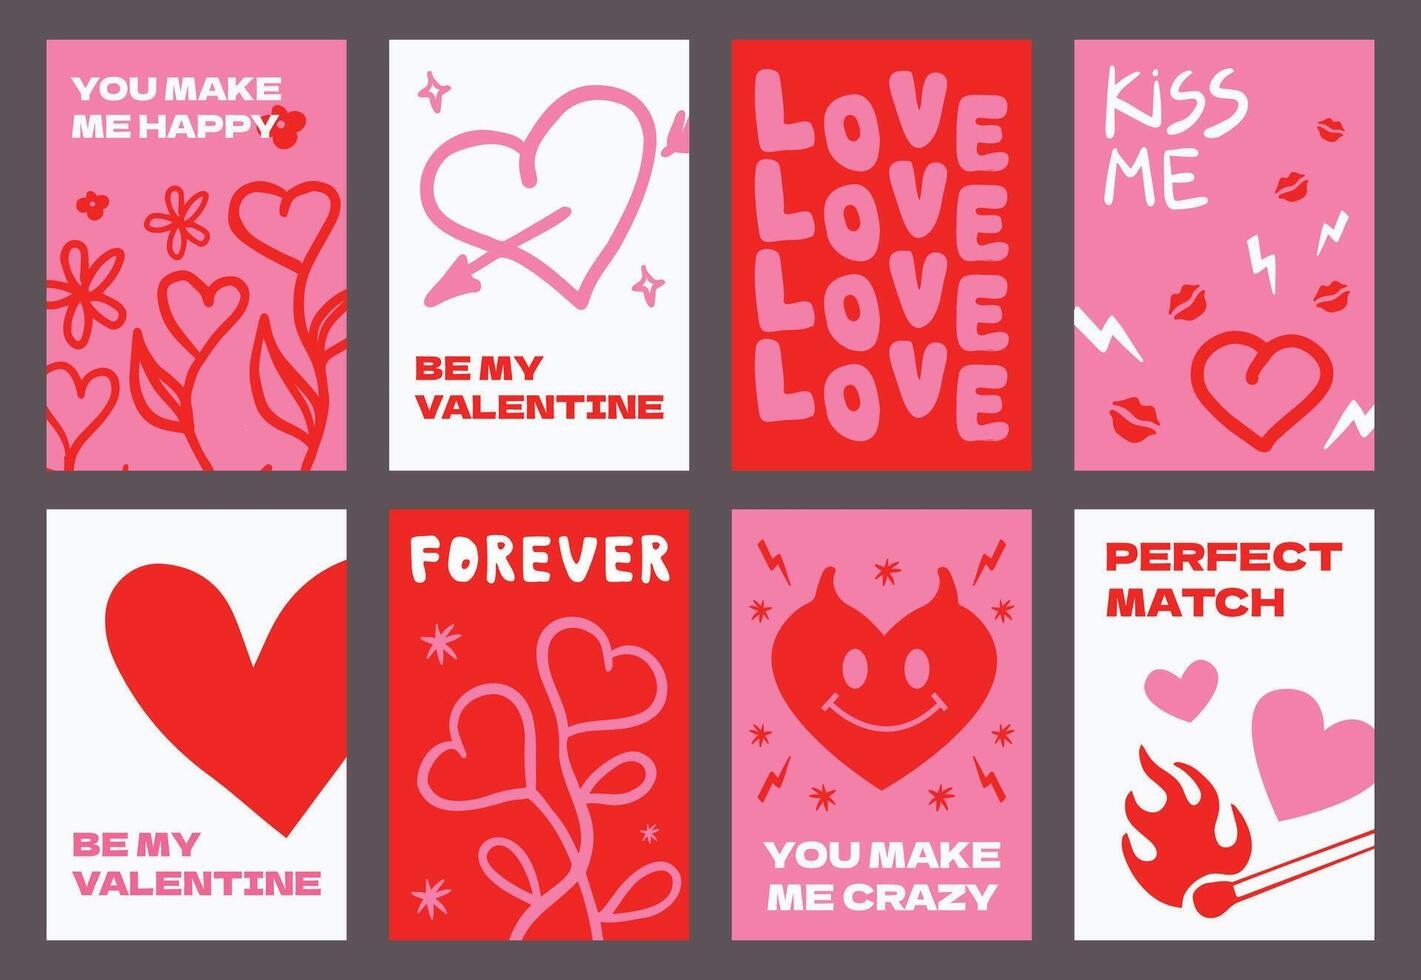 A set of poster designs for Valentine's Day in a naive minimalistic style. Postcard templates with cut-out hearts, various hand-drawn elements. vector